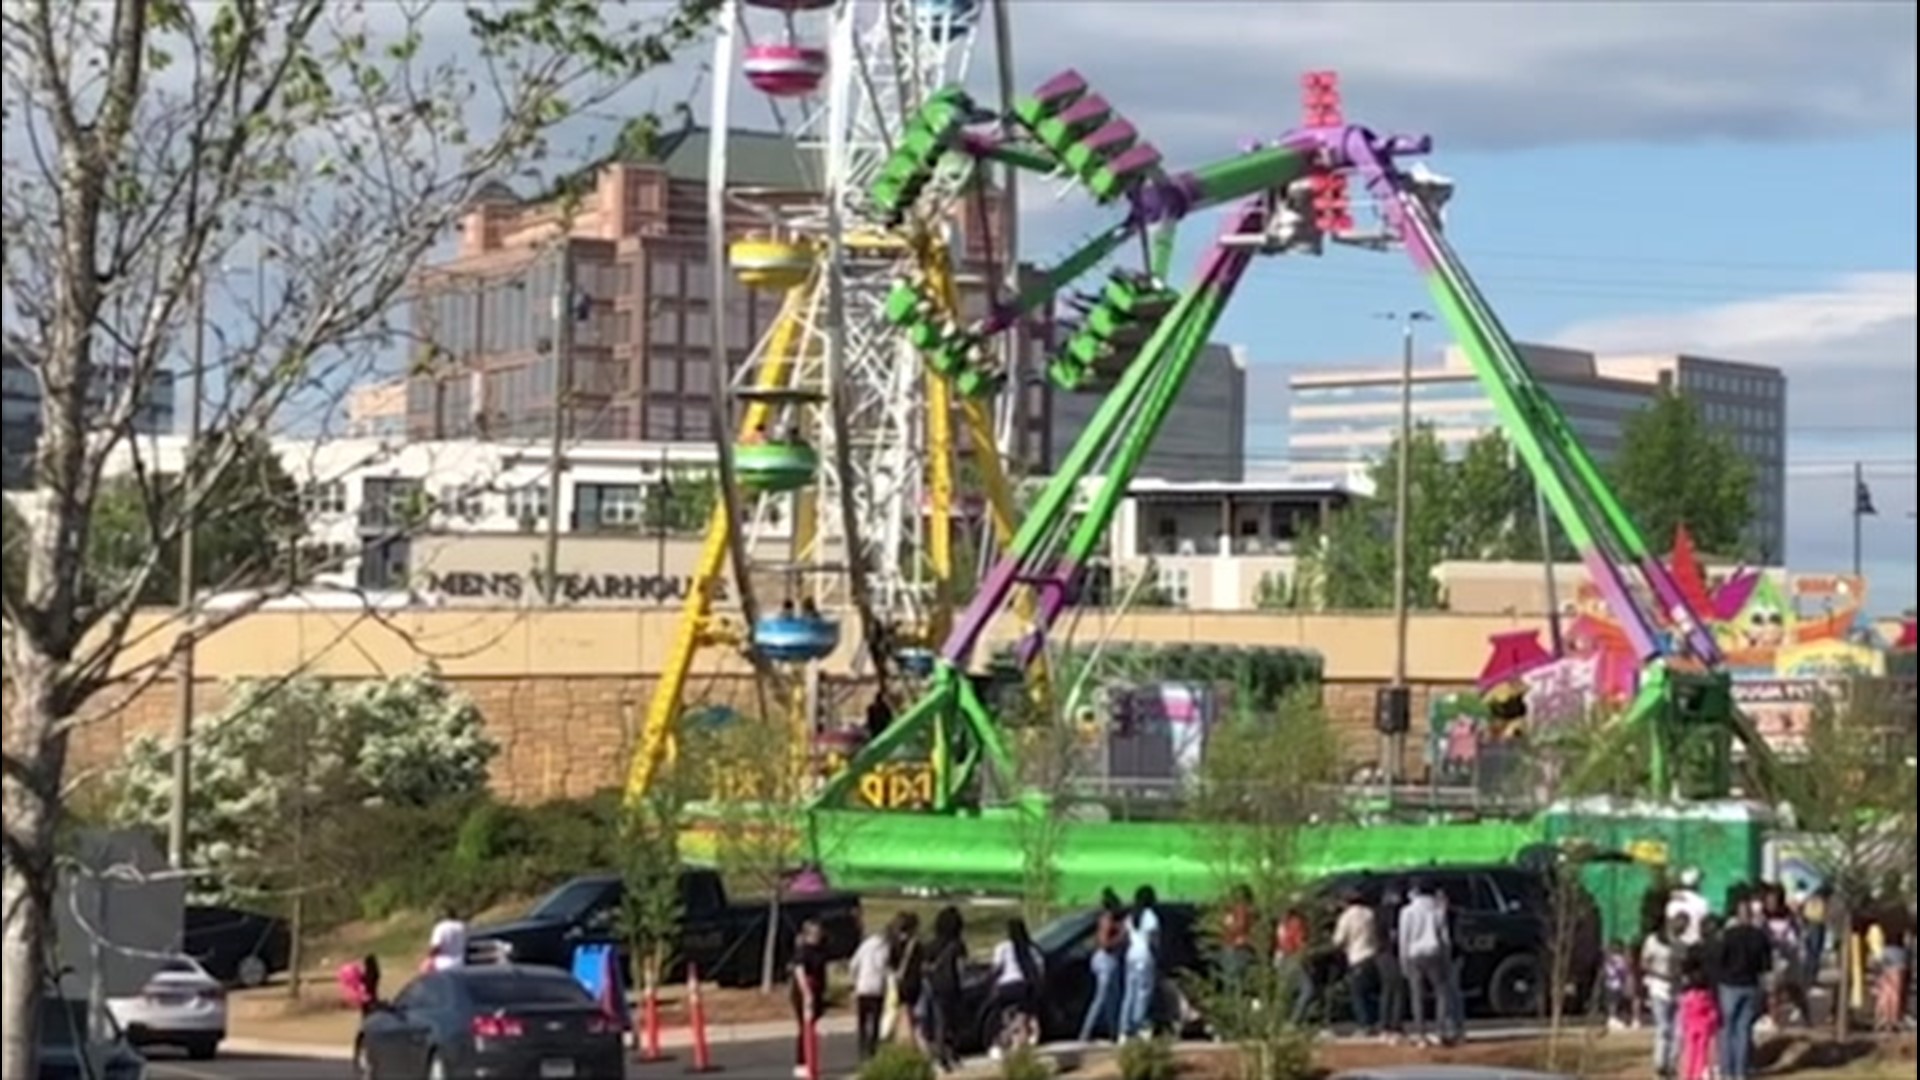 Perfect weather conditions brought out plenty of families to enjoy carnival rides in Atlanta, Georgia, on April 17.